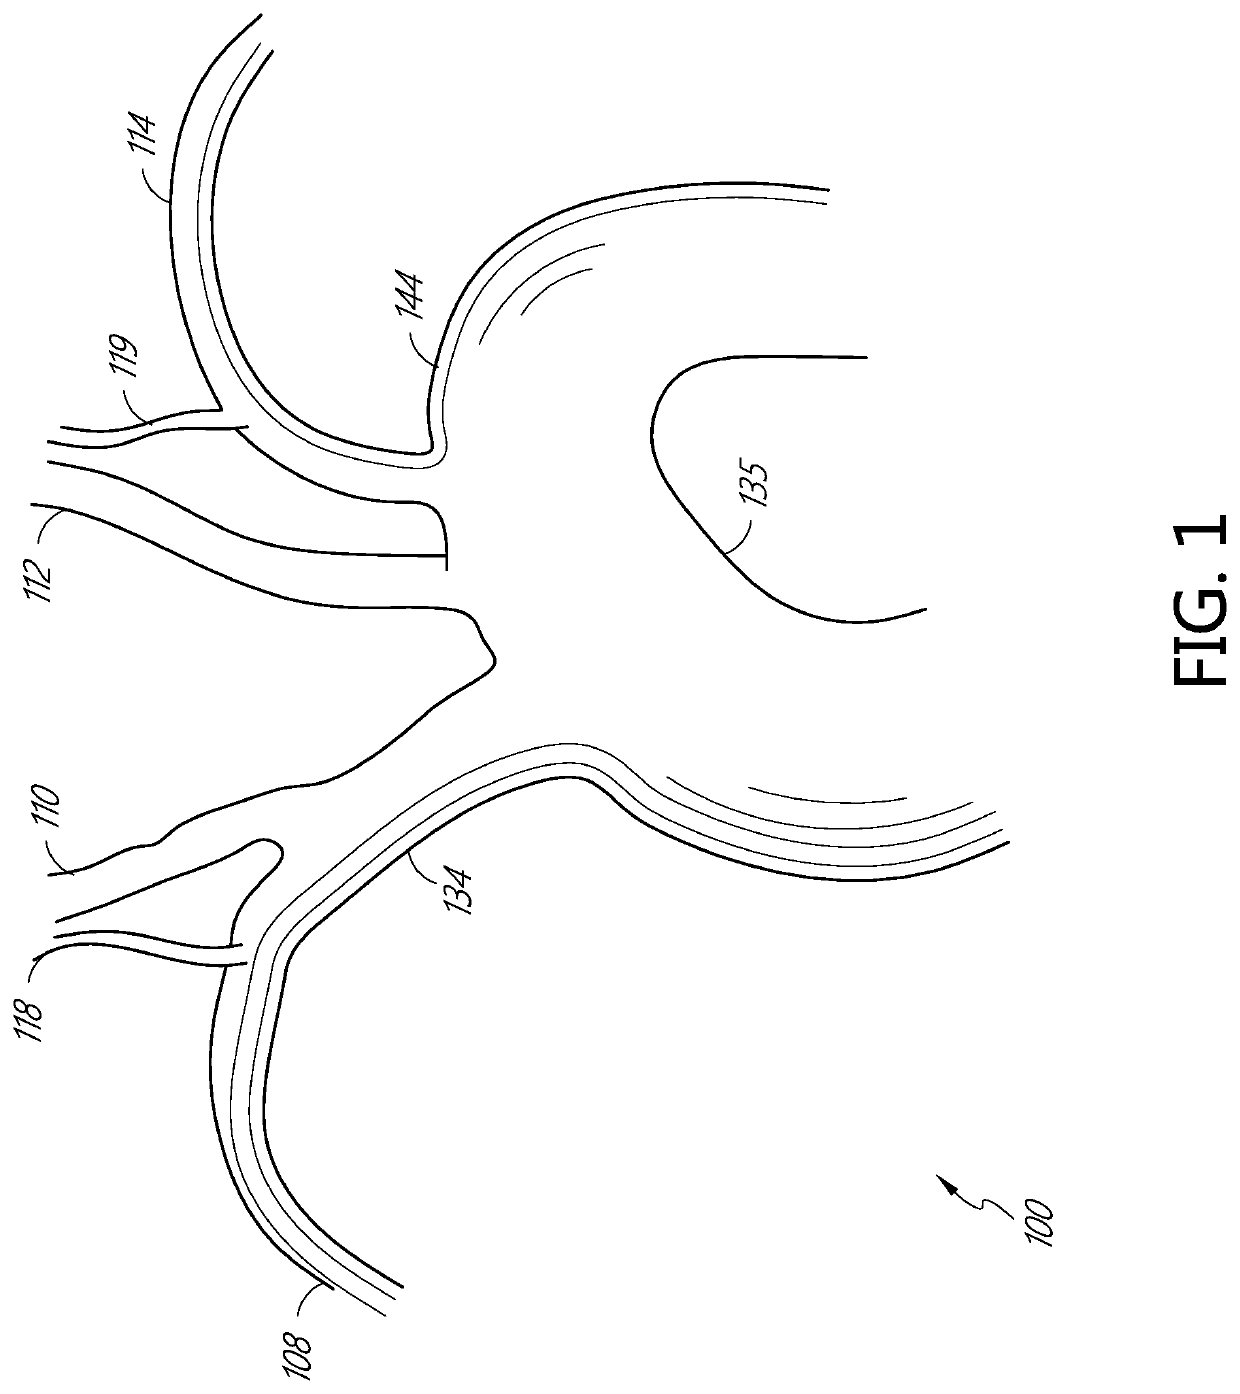 Systems and methods for protecting the cerebral vasculature